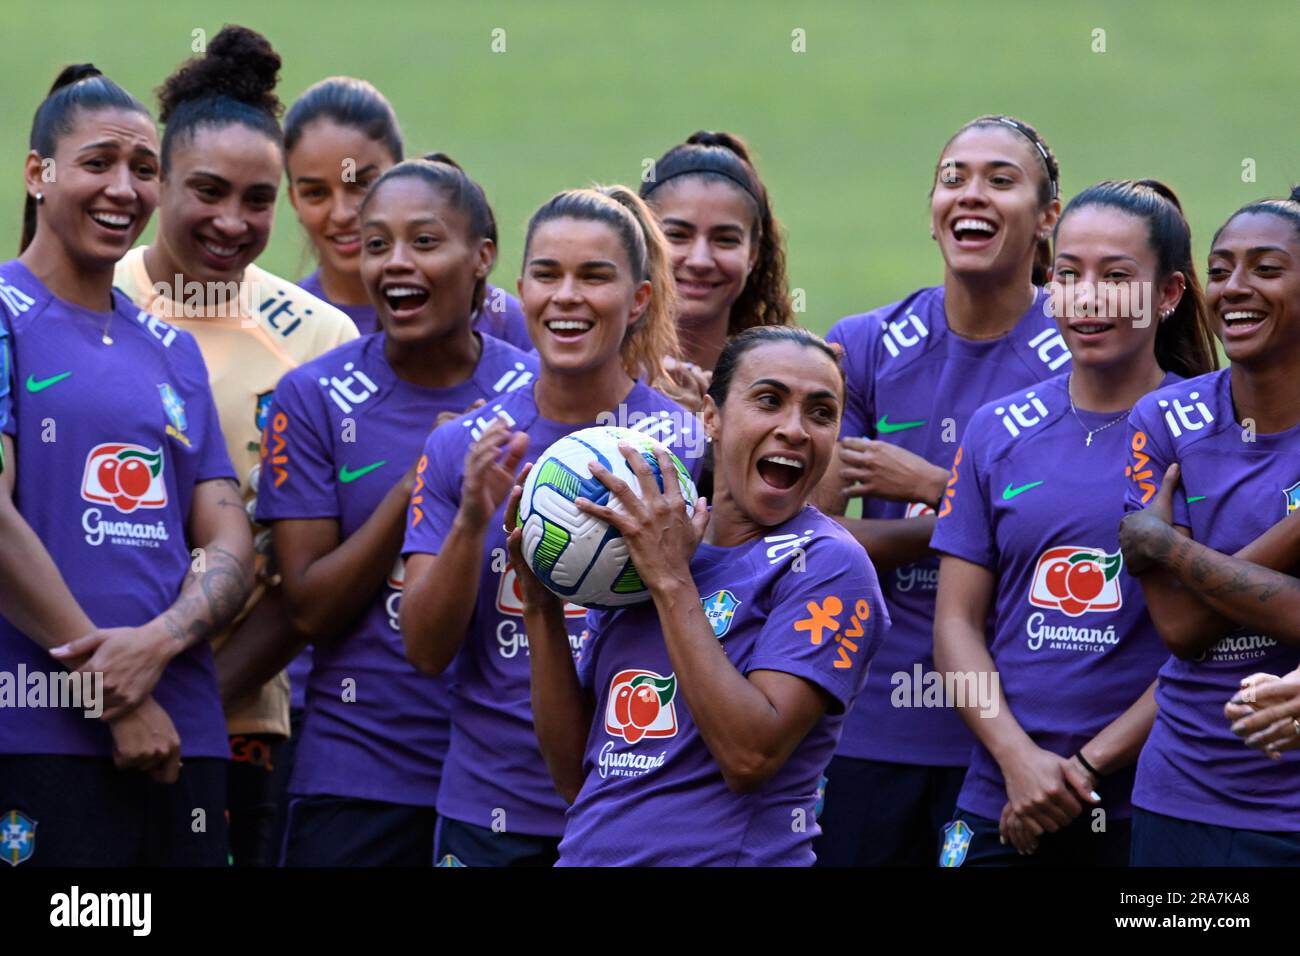 DF - BRASILIA - 07/01/2023 - BRASILIA, LULA PARTICIPATES IN THE WOMEN'S SOCCER TEAM TRAINING - Brazilian soccer player Marta Vieira, in the center, holds a ball during a group photo before the start of a training session at the Mane Garrincha stadium in Brasilia, Brazil, Saturday, July 1, 2023. The Brazilian women's national football team is scheduled to play a friendly against Chile on Sunday, ahead of their trip to the FIFA Women's World Cup. Photo: Mateus Bonomi/AGIF/Sipa USA Stock Photo